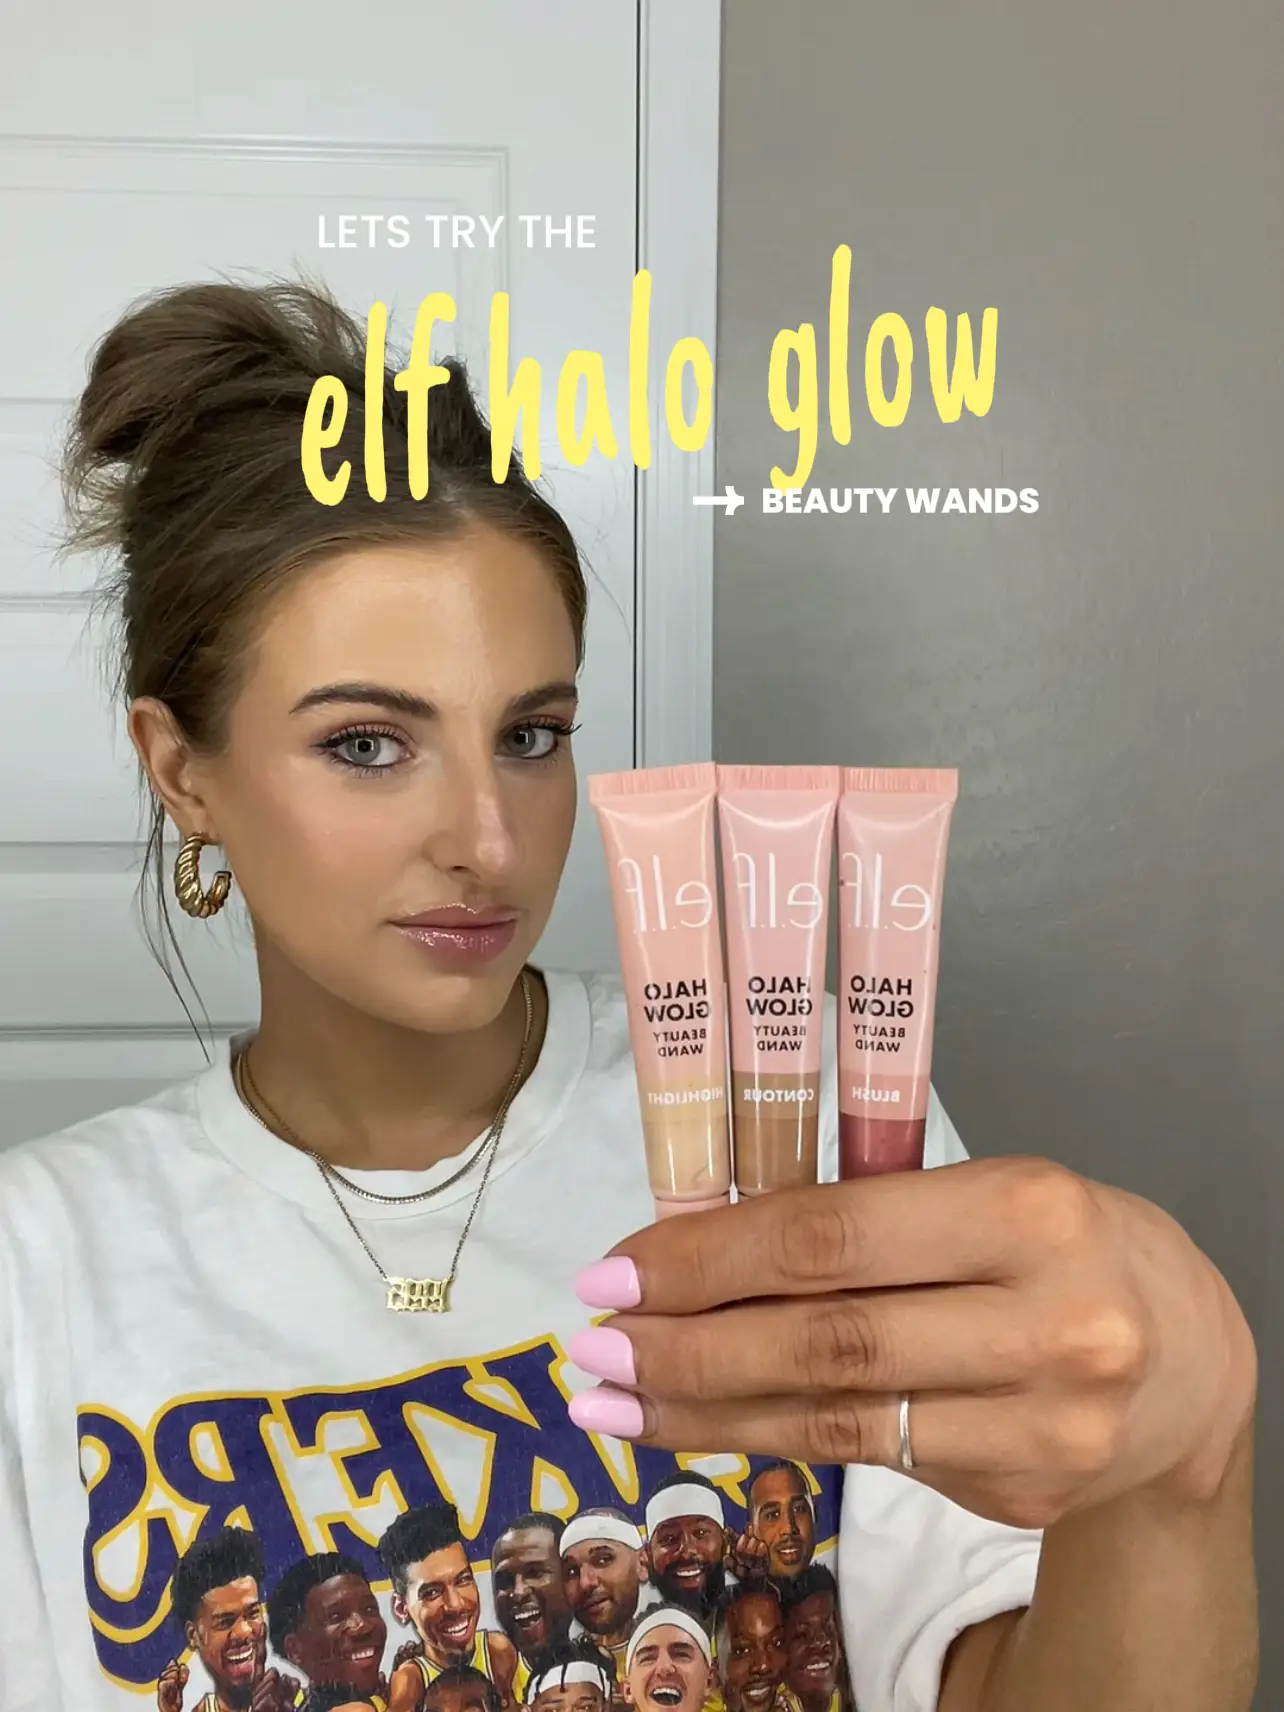  e.l.f. Halo Glow Contour Beauty Wand, Liquid Contour Wand For A  Naturally Sculpted Look, Buildable Formula, Vegan & Cruelty-free,  Fair/Light : Beauty & Personal Care